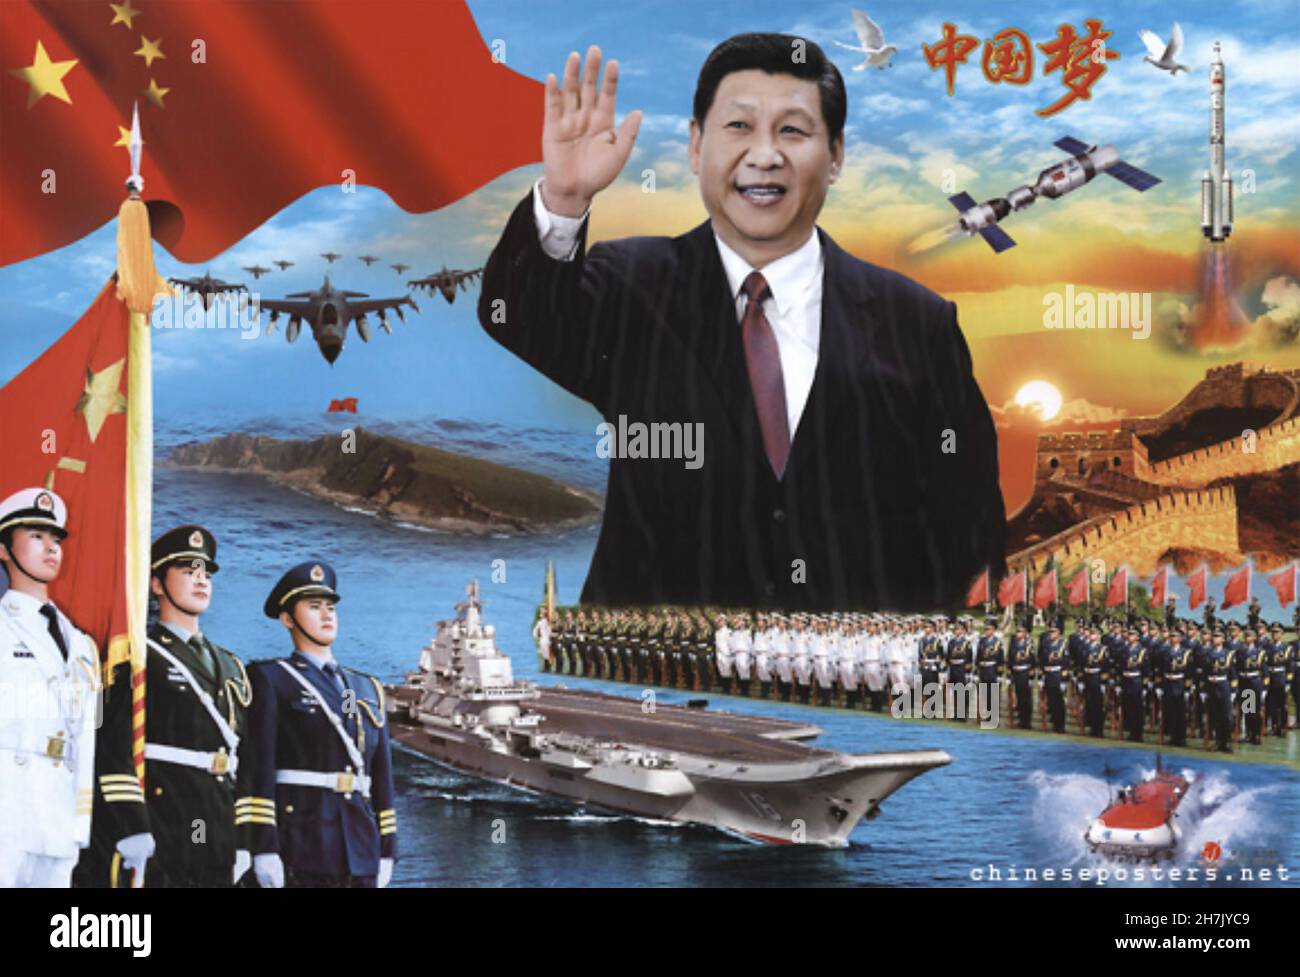 XI JINPING General Secretary of the Chinese Communist Party on a 2013 poster which includes an aerial view of the disputed Diaoyu/Senkaku Islands and China's first aircraft carrier the Liaoning, launched in 1988. Stock Photo